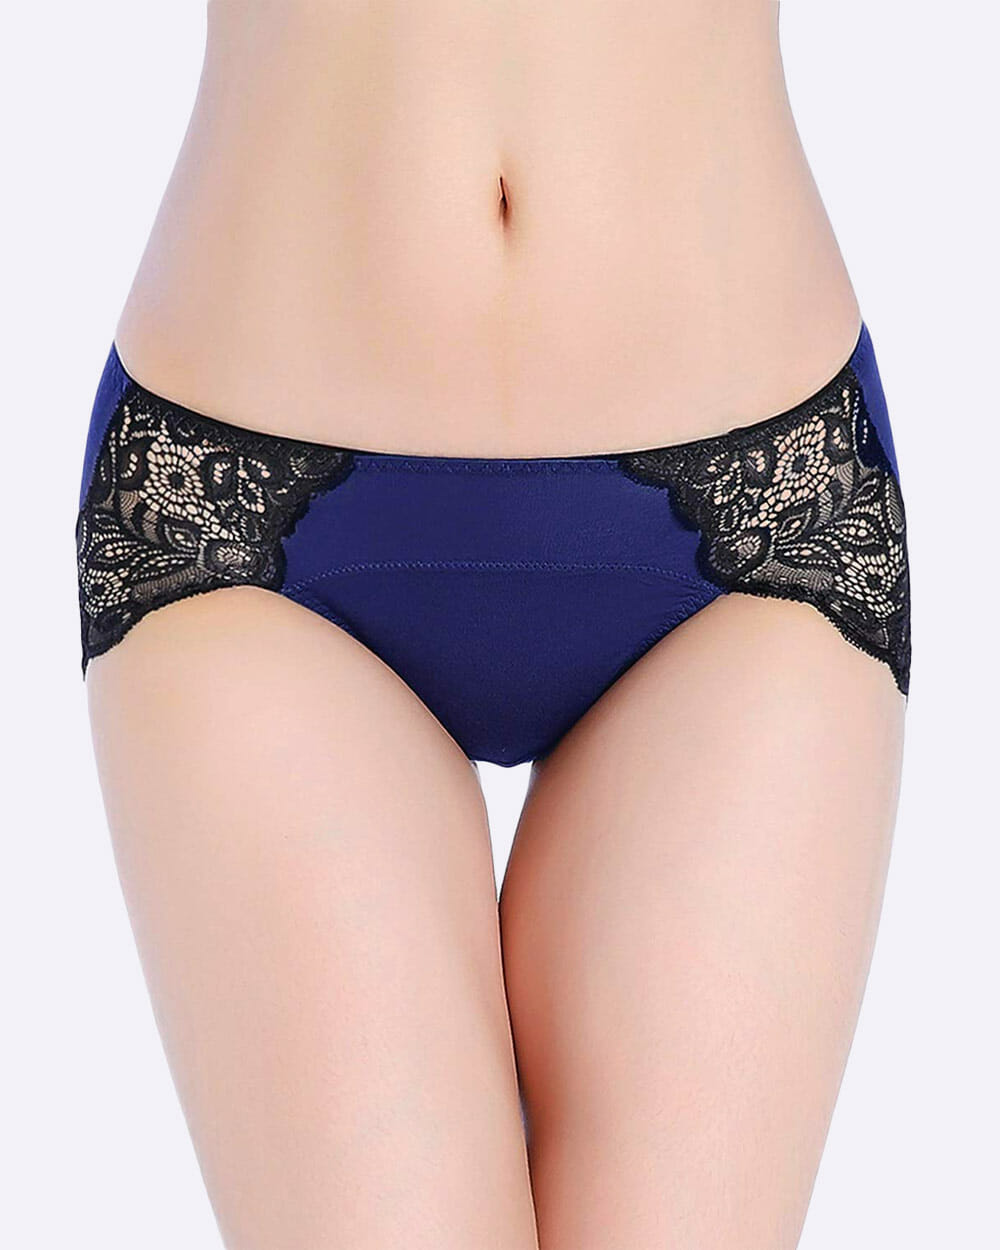 Lace lingerie style period panties by Intimate Portal